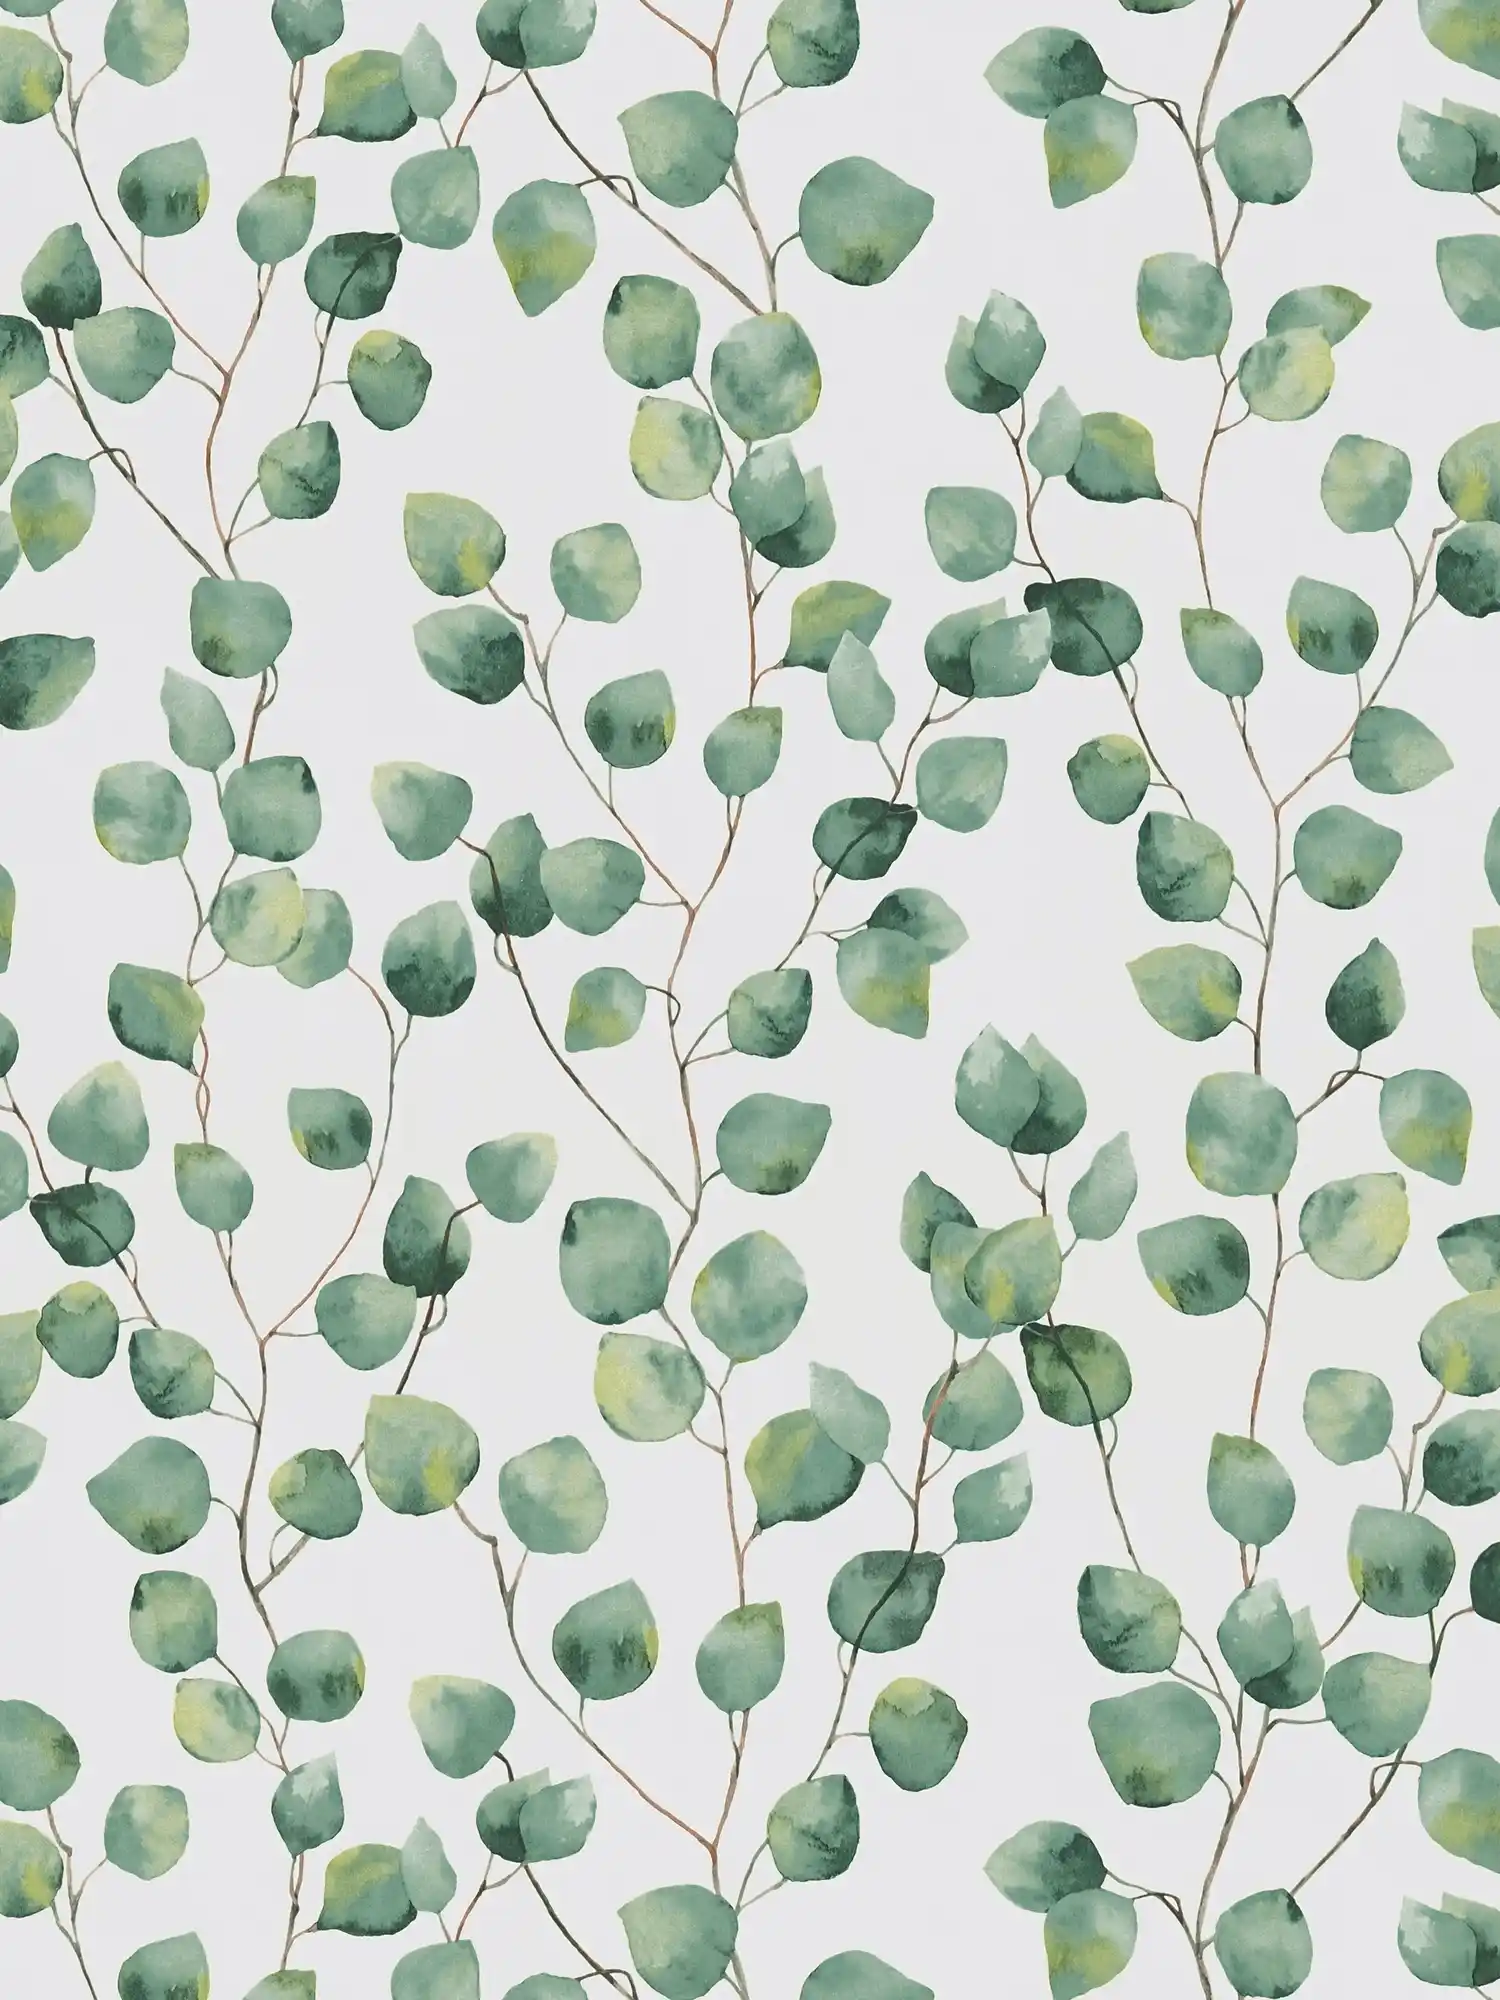 Self-adhesive wallpaper | leaf tendrils in watercolour style - white, green
